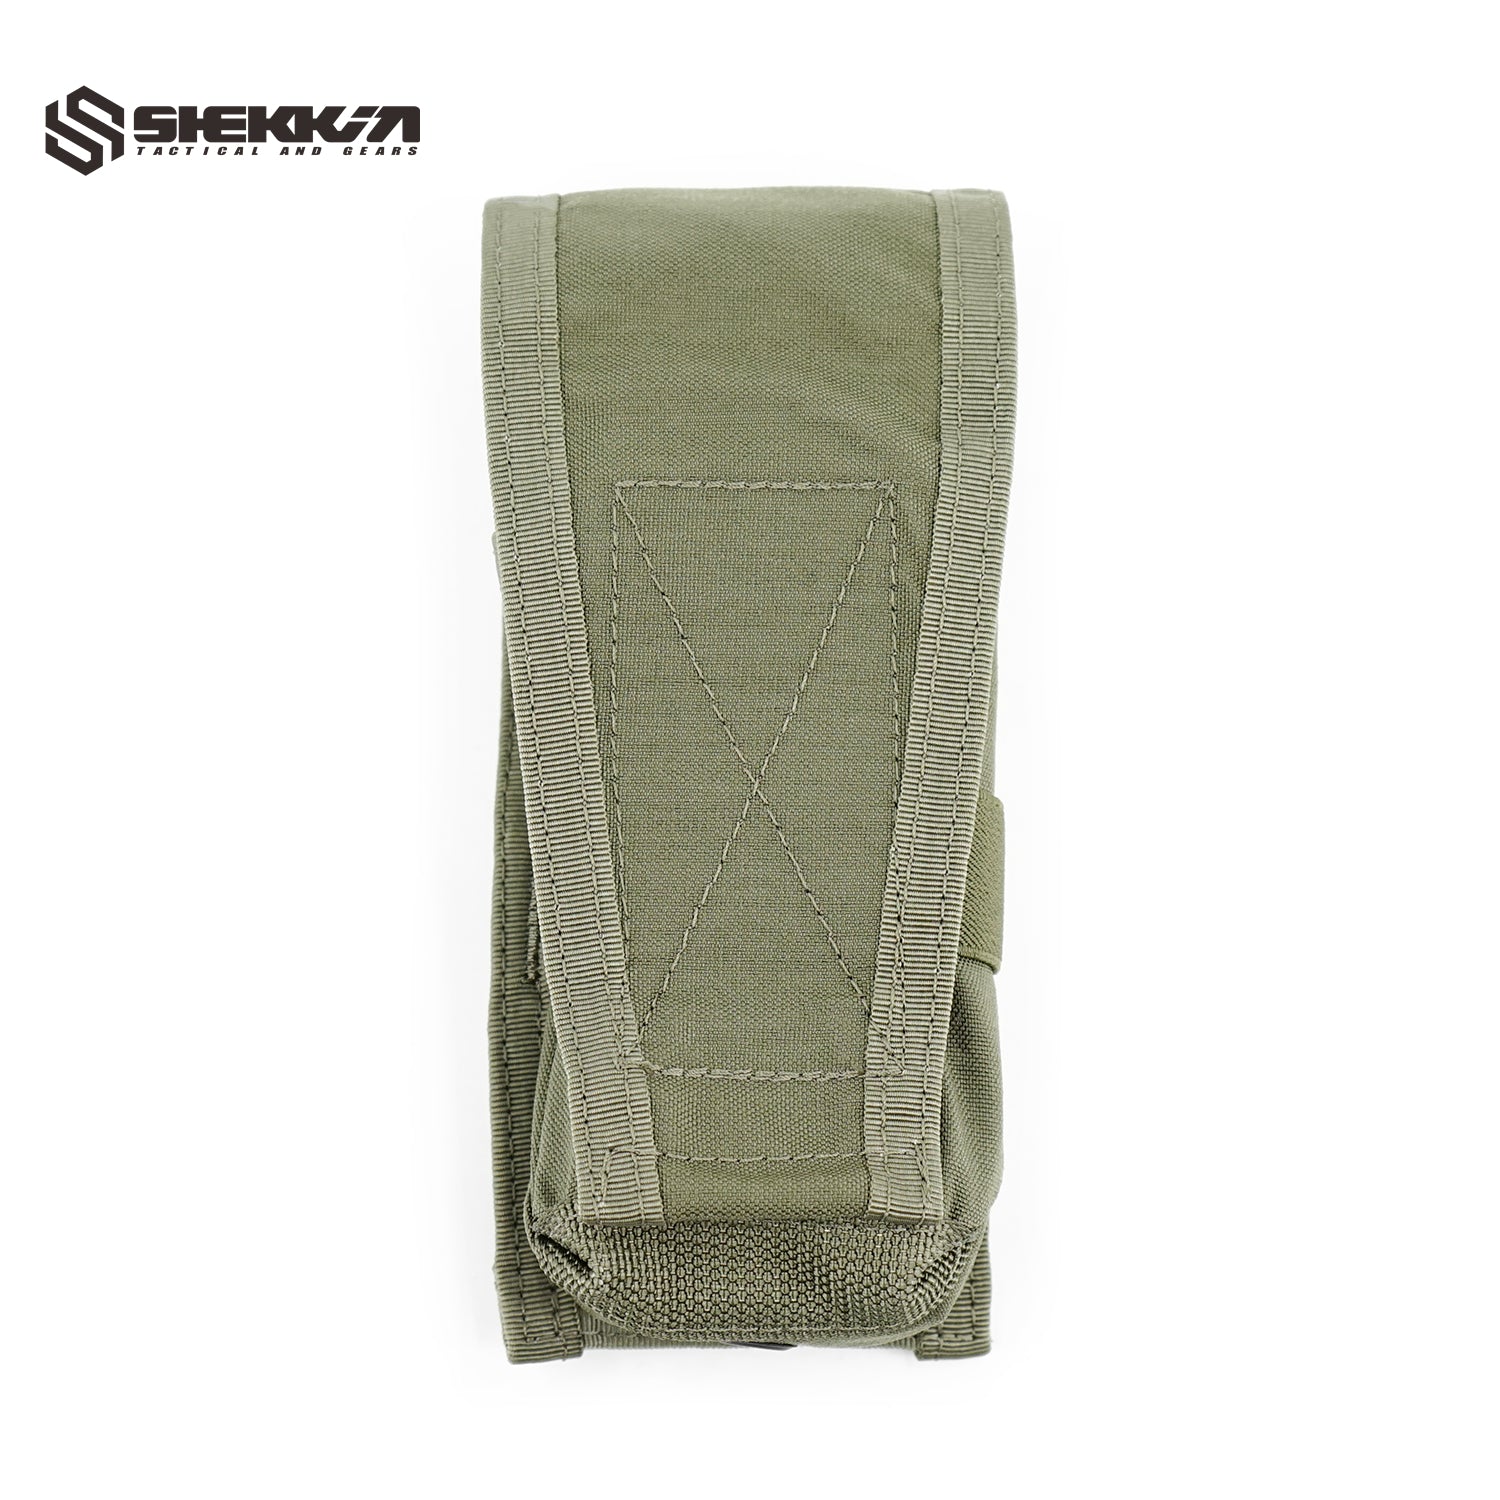 330D Tiered M4 Mag Pouch